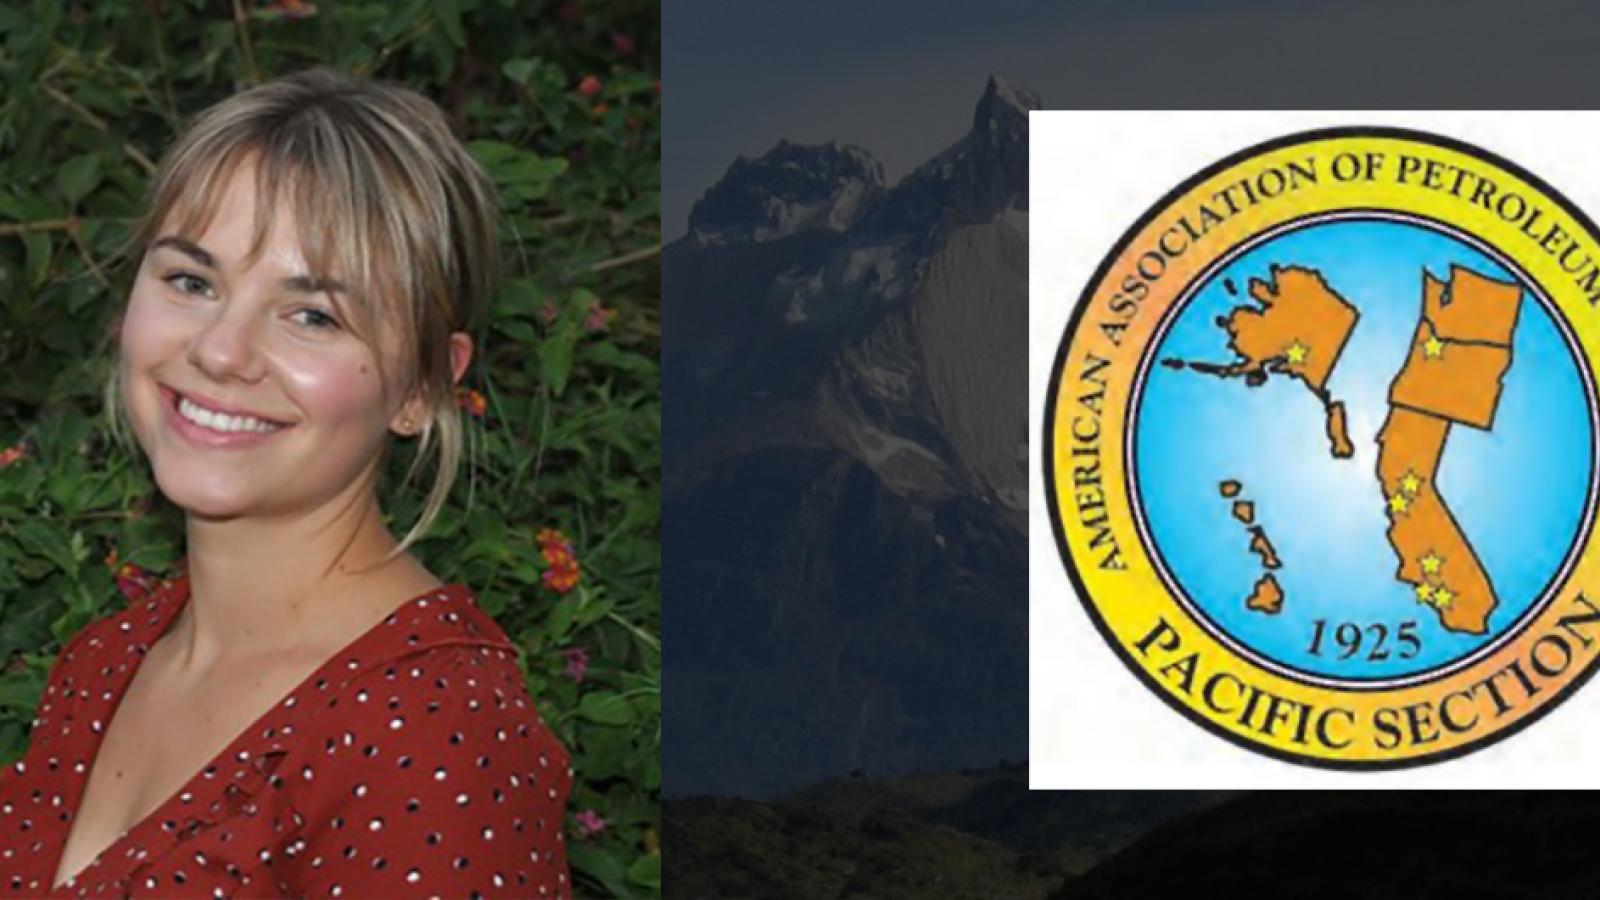 Megan Mortimer-Lamb and the Pacific Section of the American Assoiation of Petroleum Geologists